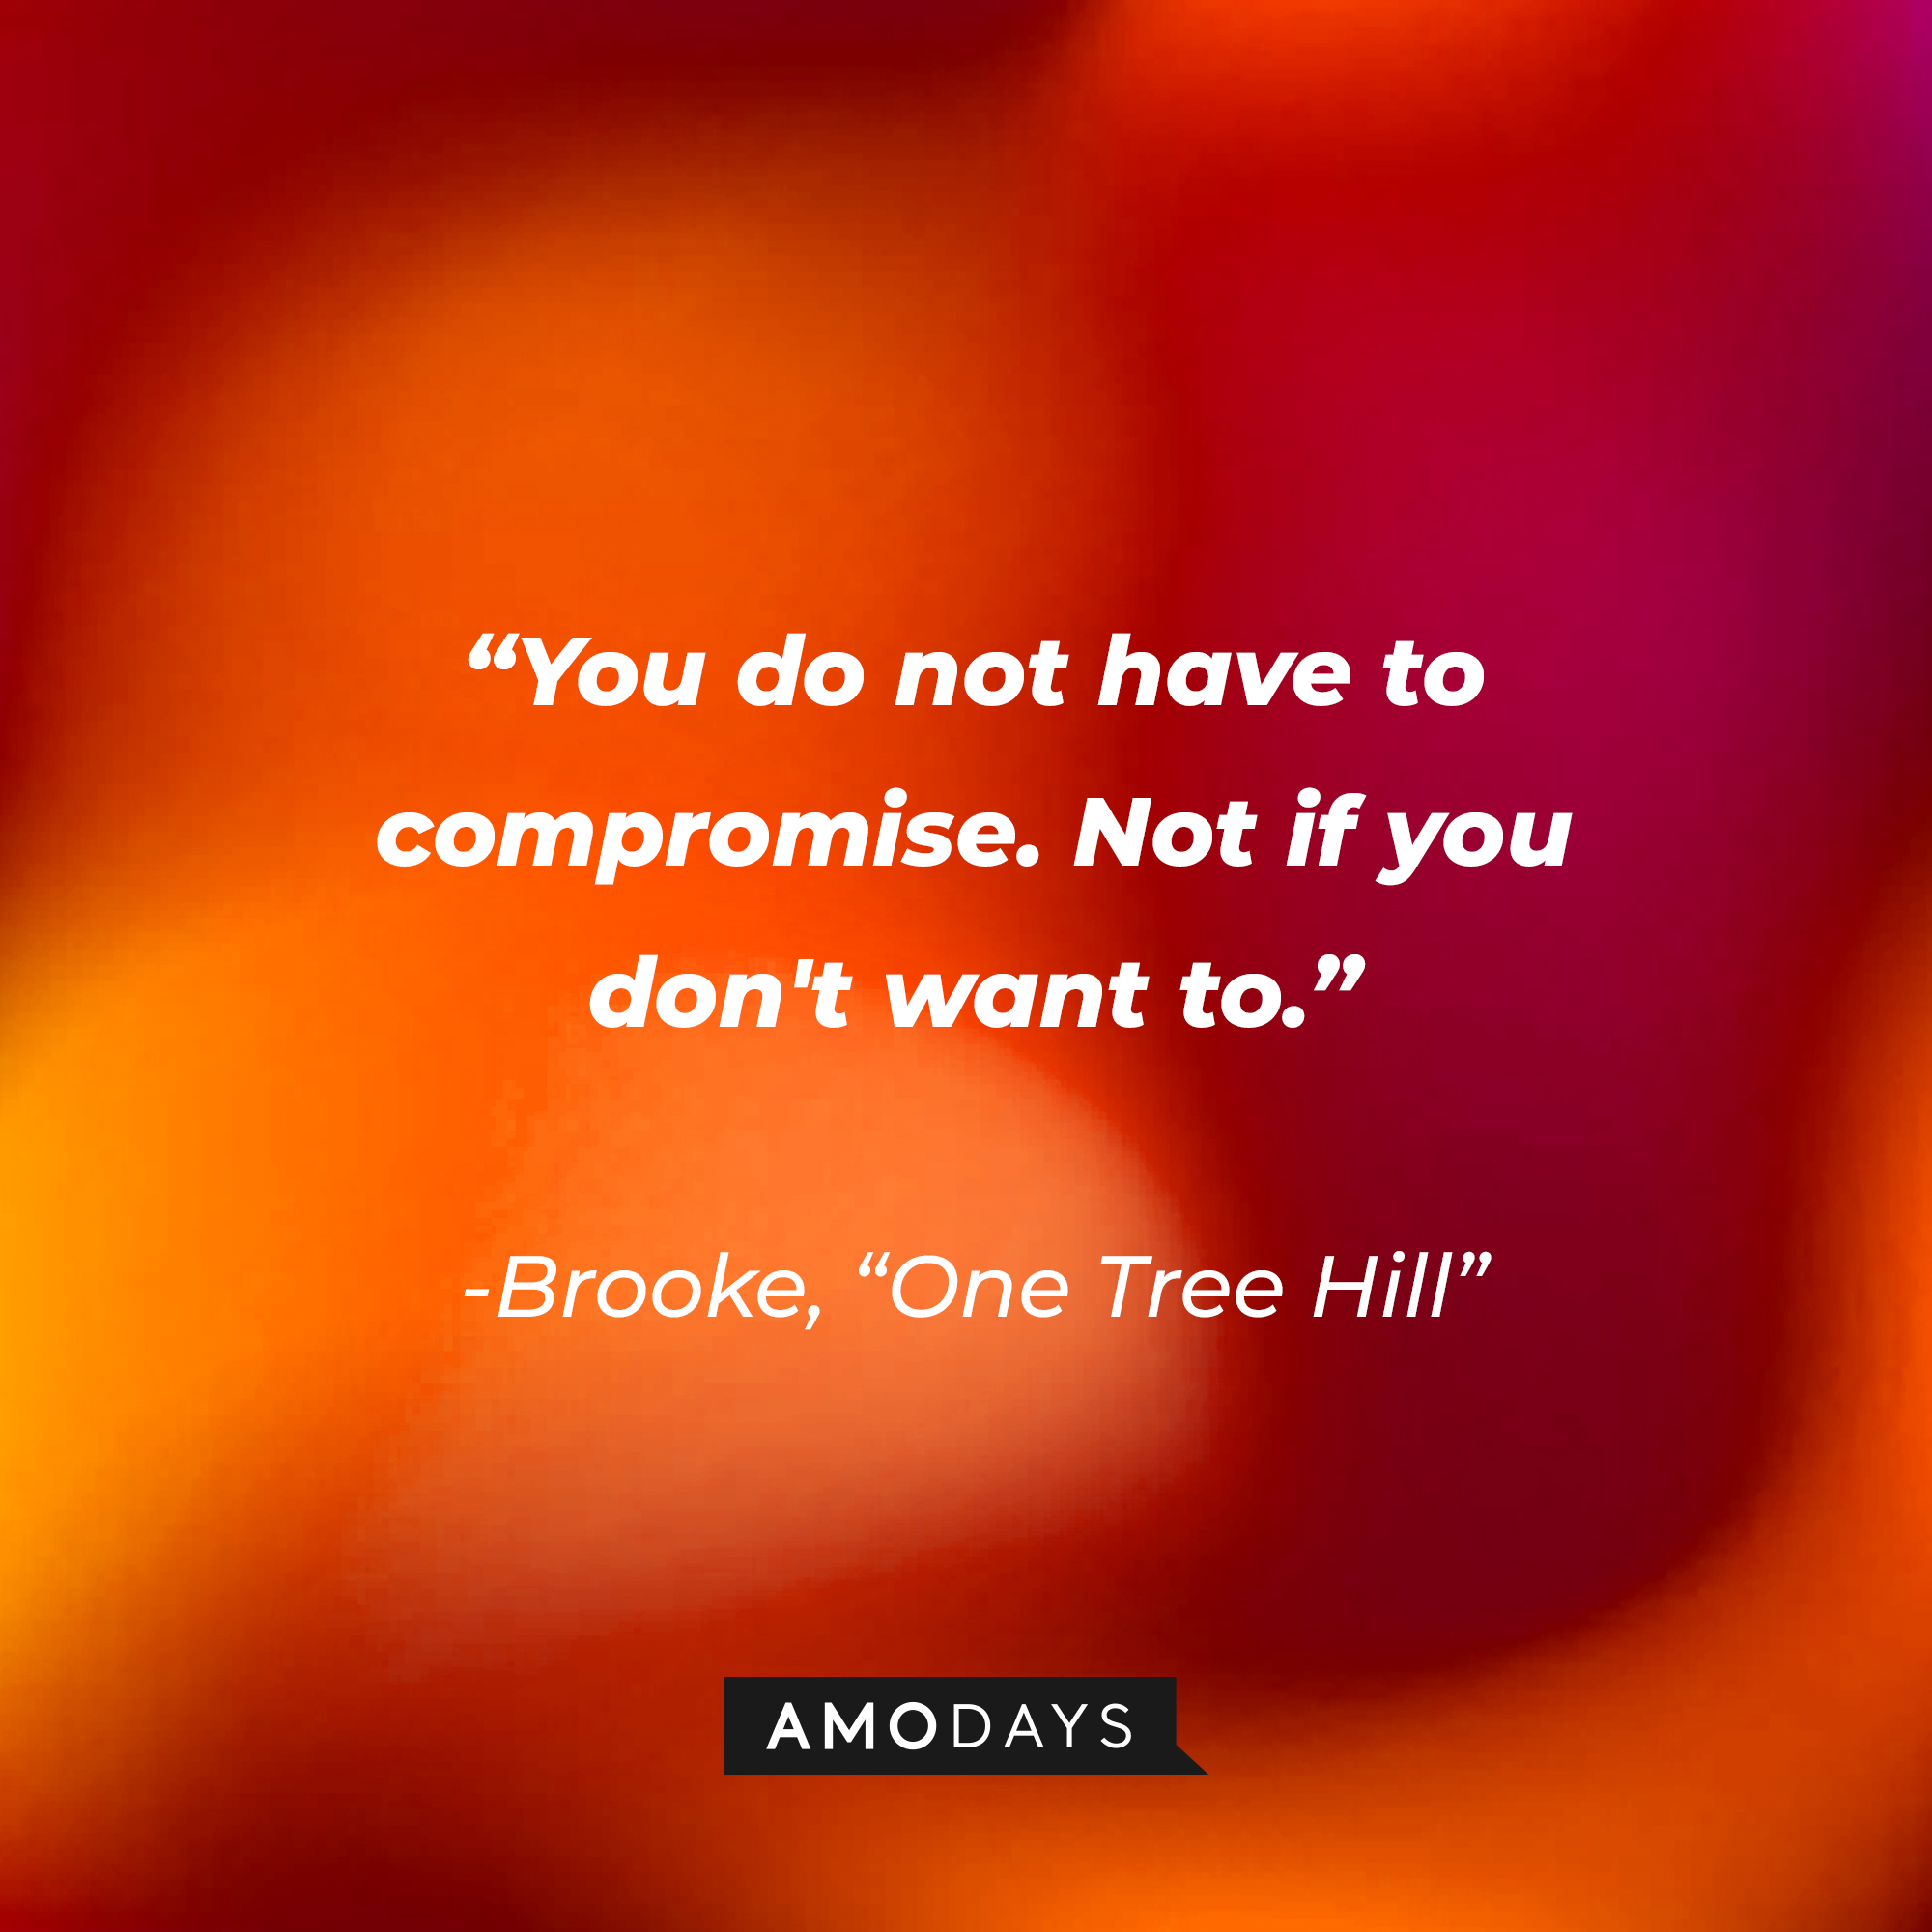 Brooke’s quote from “One Tree Hill”: “You do not have to compromise. Not if you don't want to.” | Source: AmoDays